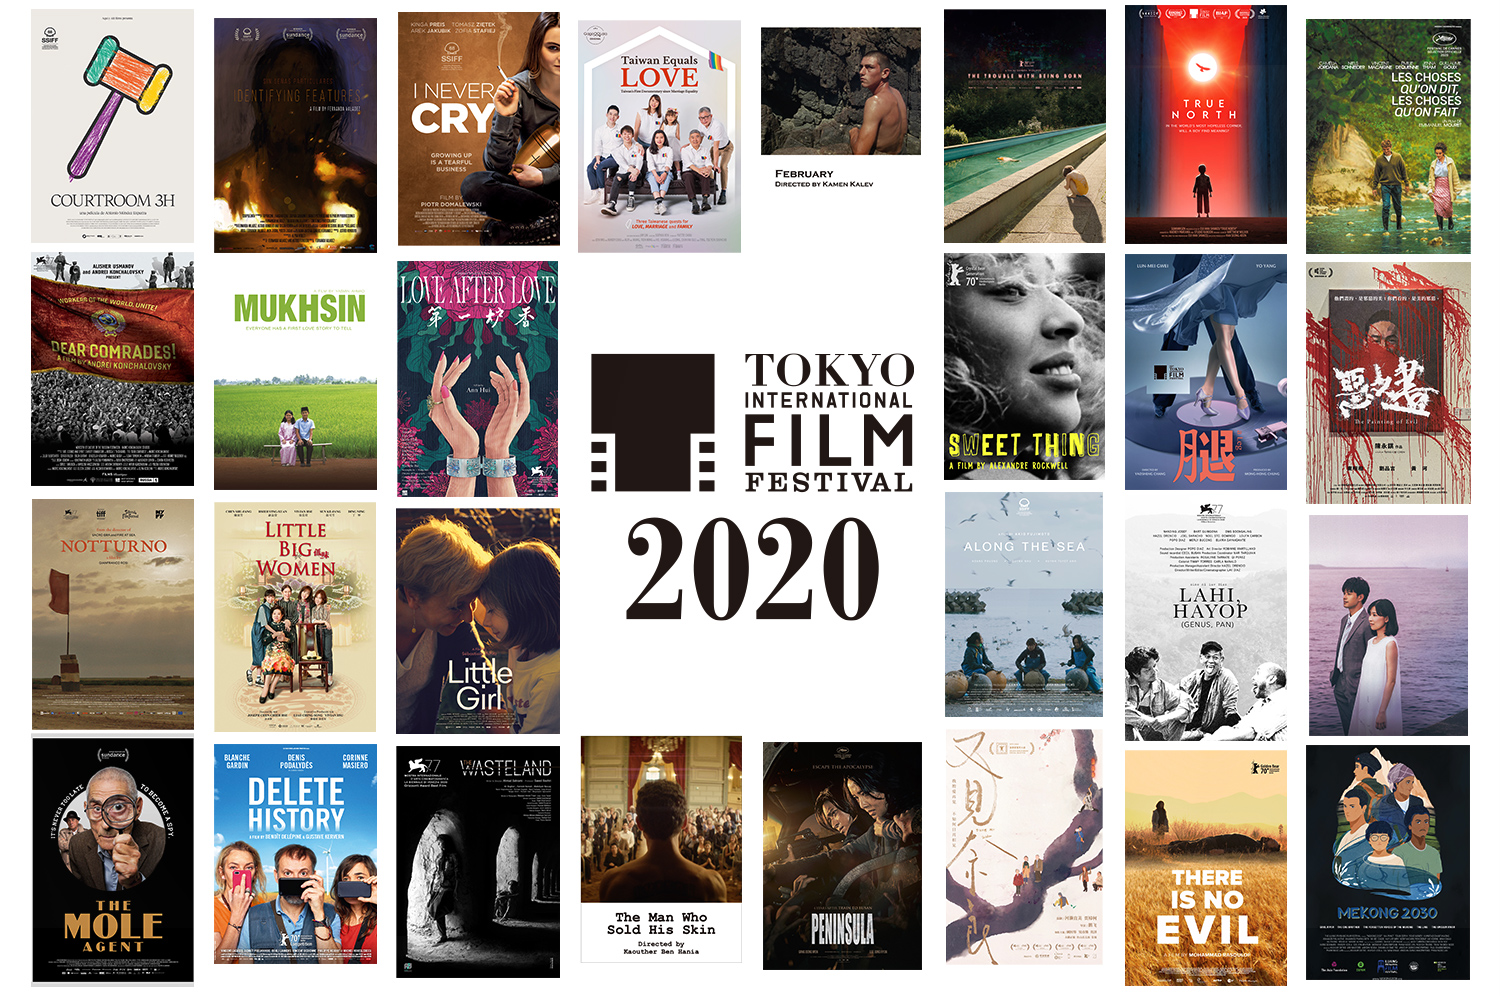 World Focus: The World Focus section's lineup will showcase works from film festivals worldwide, foreign films unreleased in Japan, and award-winning films that have been screened at overseas film festivals. This year, we will be featuring Taiwan and continue the collaboration, which began last year, with the Latin Beat Film Festival.